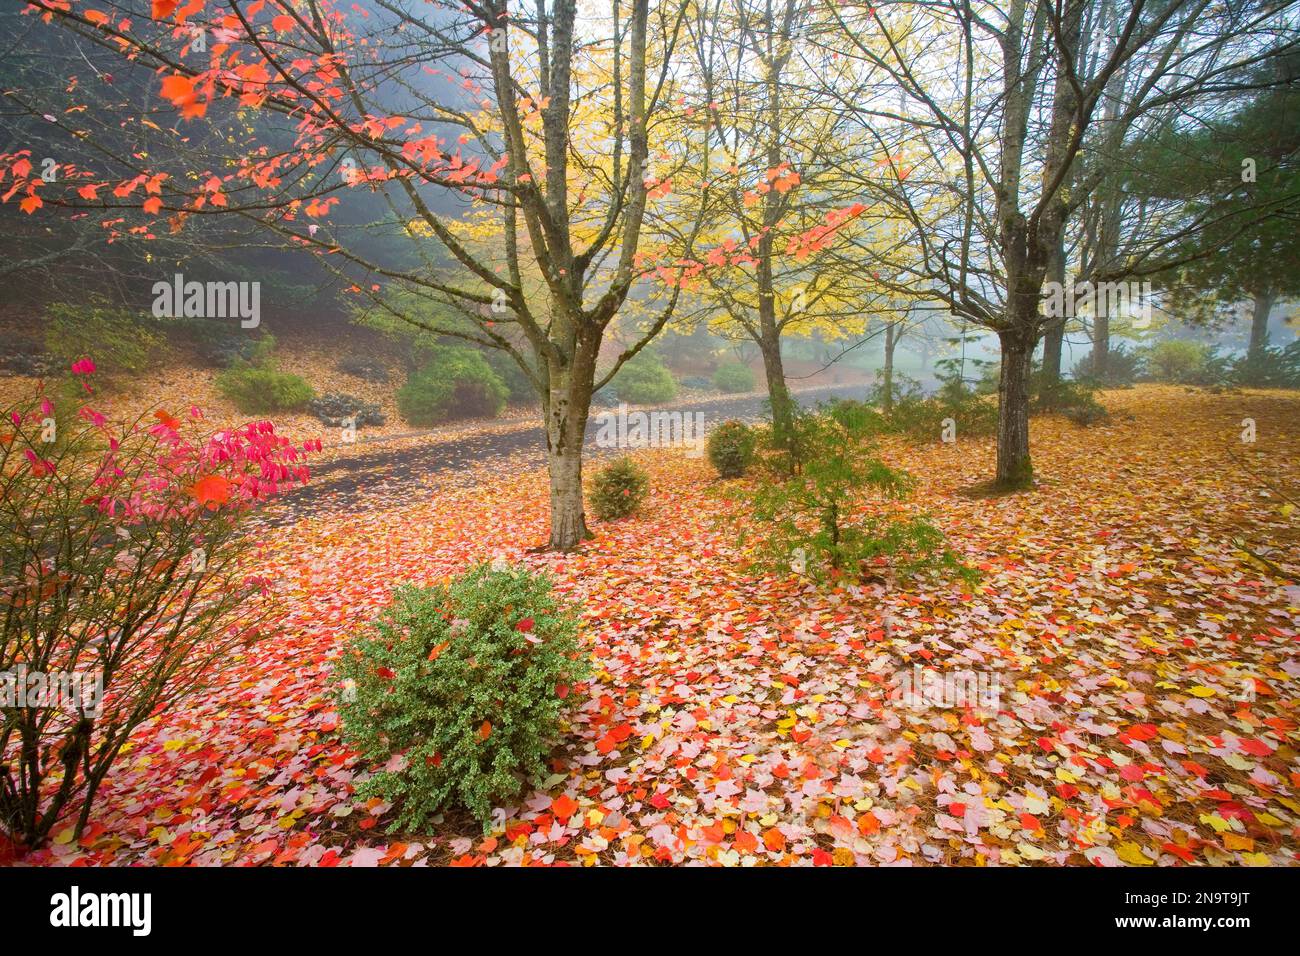 Autumn coloured foliage in fog in autumn in the Pacific Northwest, with fallen leaves covering the ground Stock Photo